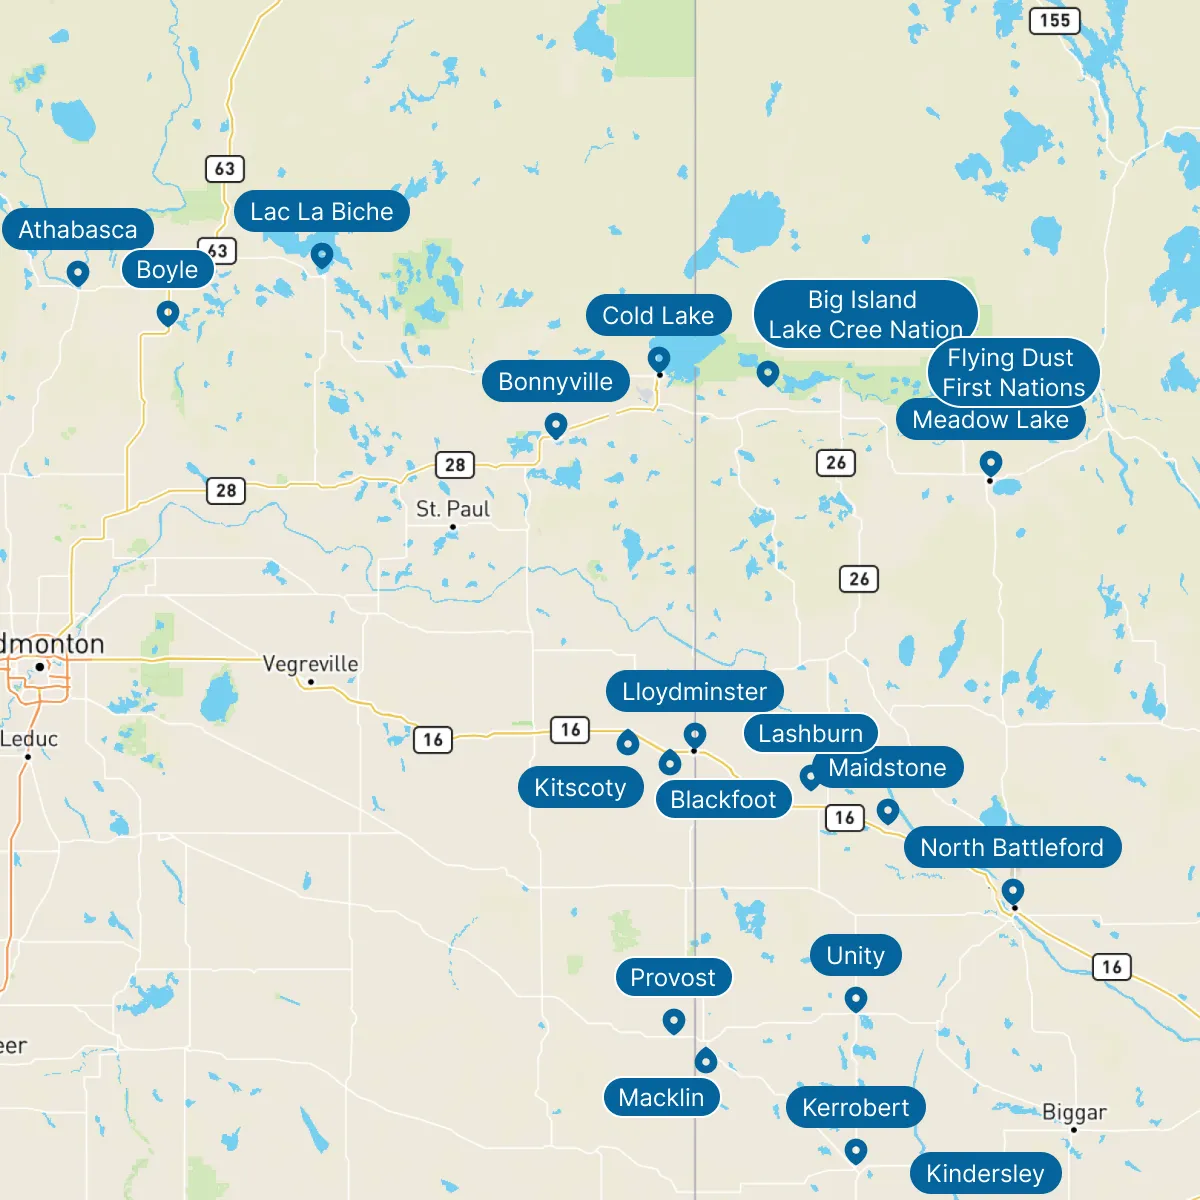 Map showing pins on cities including Lloydminster, AB/SK, Cold Lake, AB. North Battleford, SK. Bonnyville, AB. Meadow Lake, SK. Kindersley, SK. Battleford, SK. Athabasca, AB. Lac La Biche, AB. Unity, SK, Provost, AB. Big Island Lake Cree Nation, SK. Macklin, SK. Blackfoot, AB. Wilkie, SK. Lashburn, SK. Maidstone, SK. Flying Dust First Nations, SK. Kerrobert, SK. Kitscoty, AB. and Boyle, A